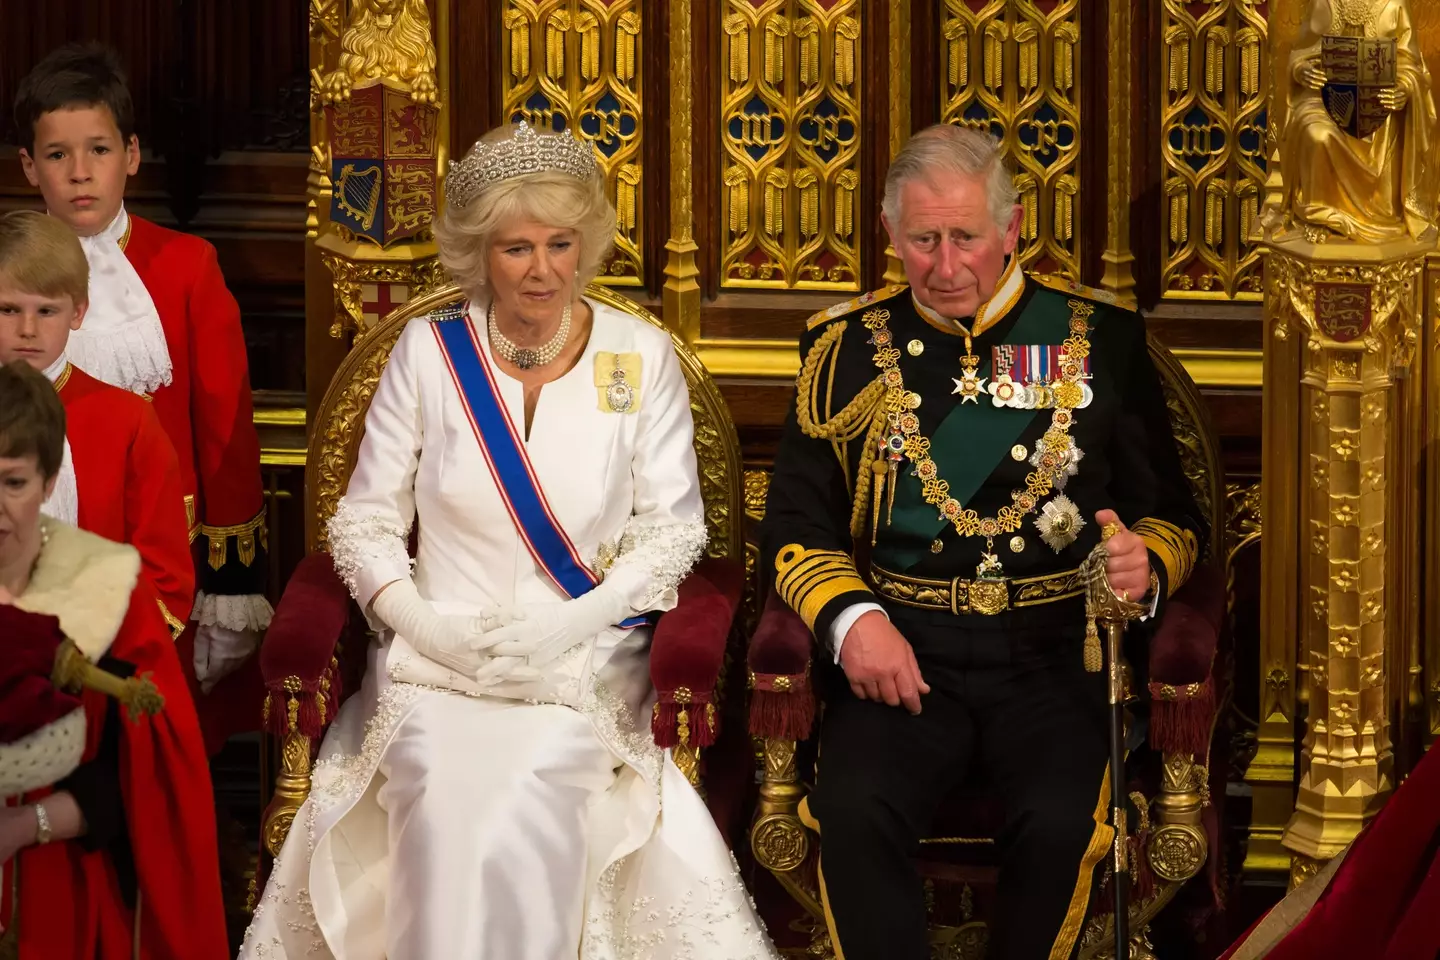 Camilla will be known as Queen Consort when Charles becomes King.